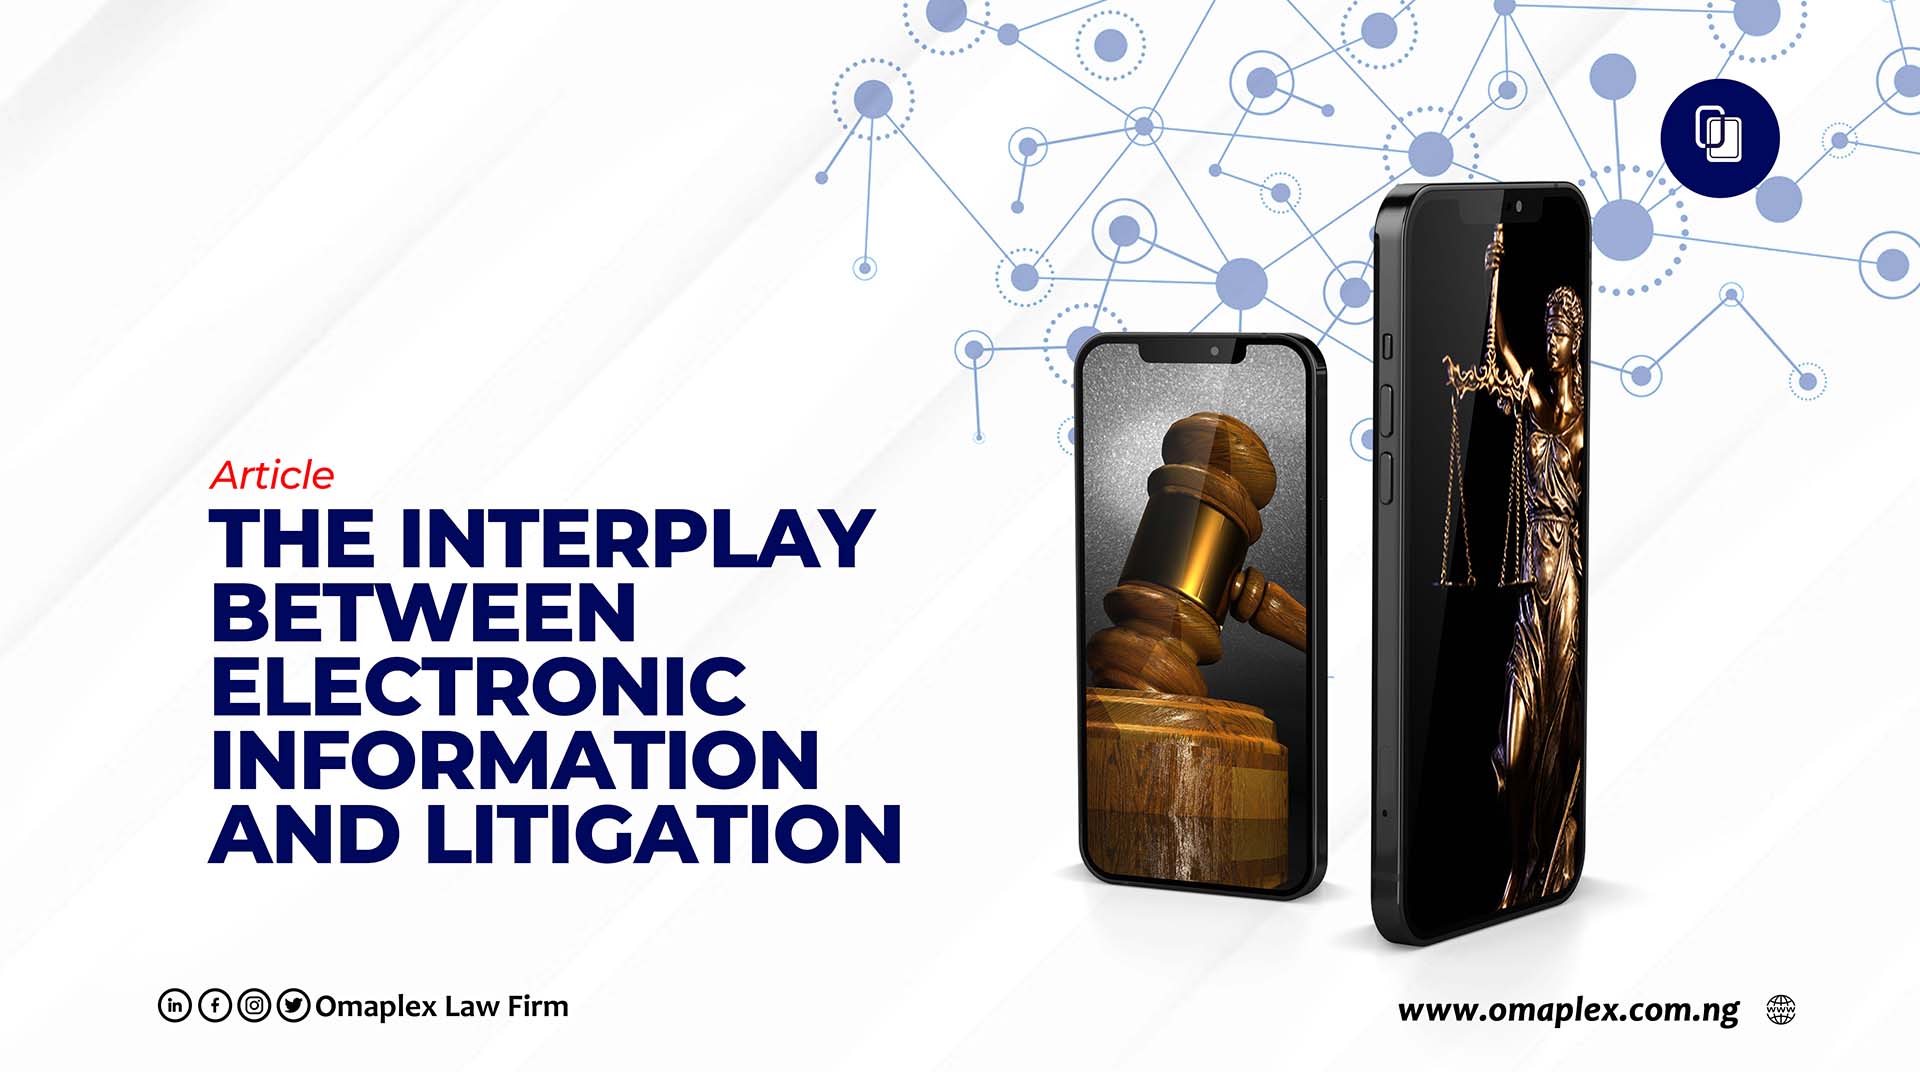 The Interplay Between Electronic Information and Litigation